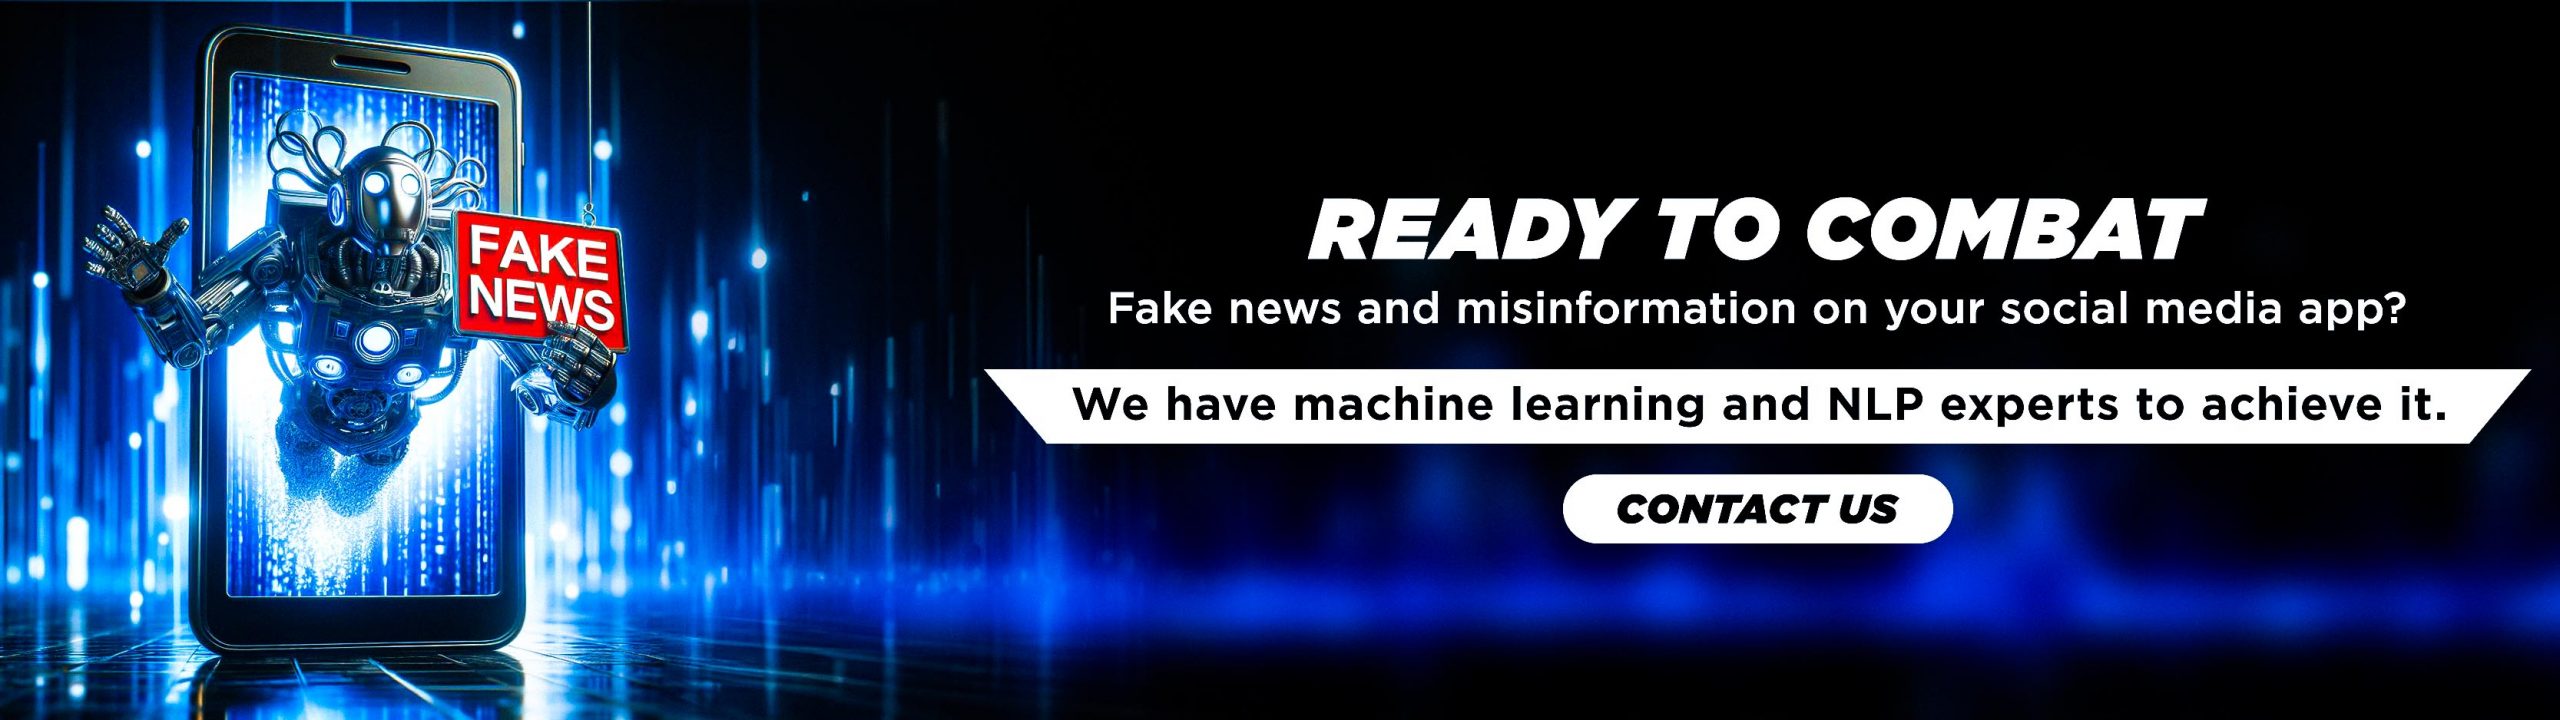 Ready to combat fake news and misinformation on your social media app